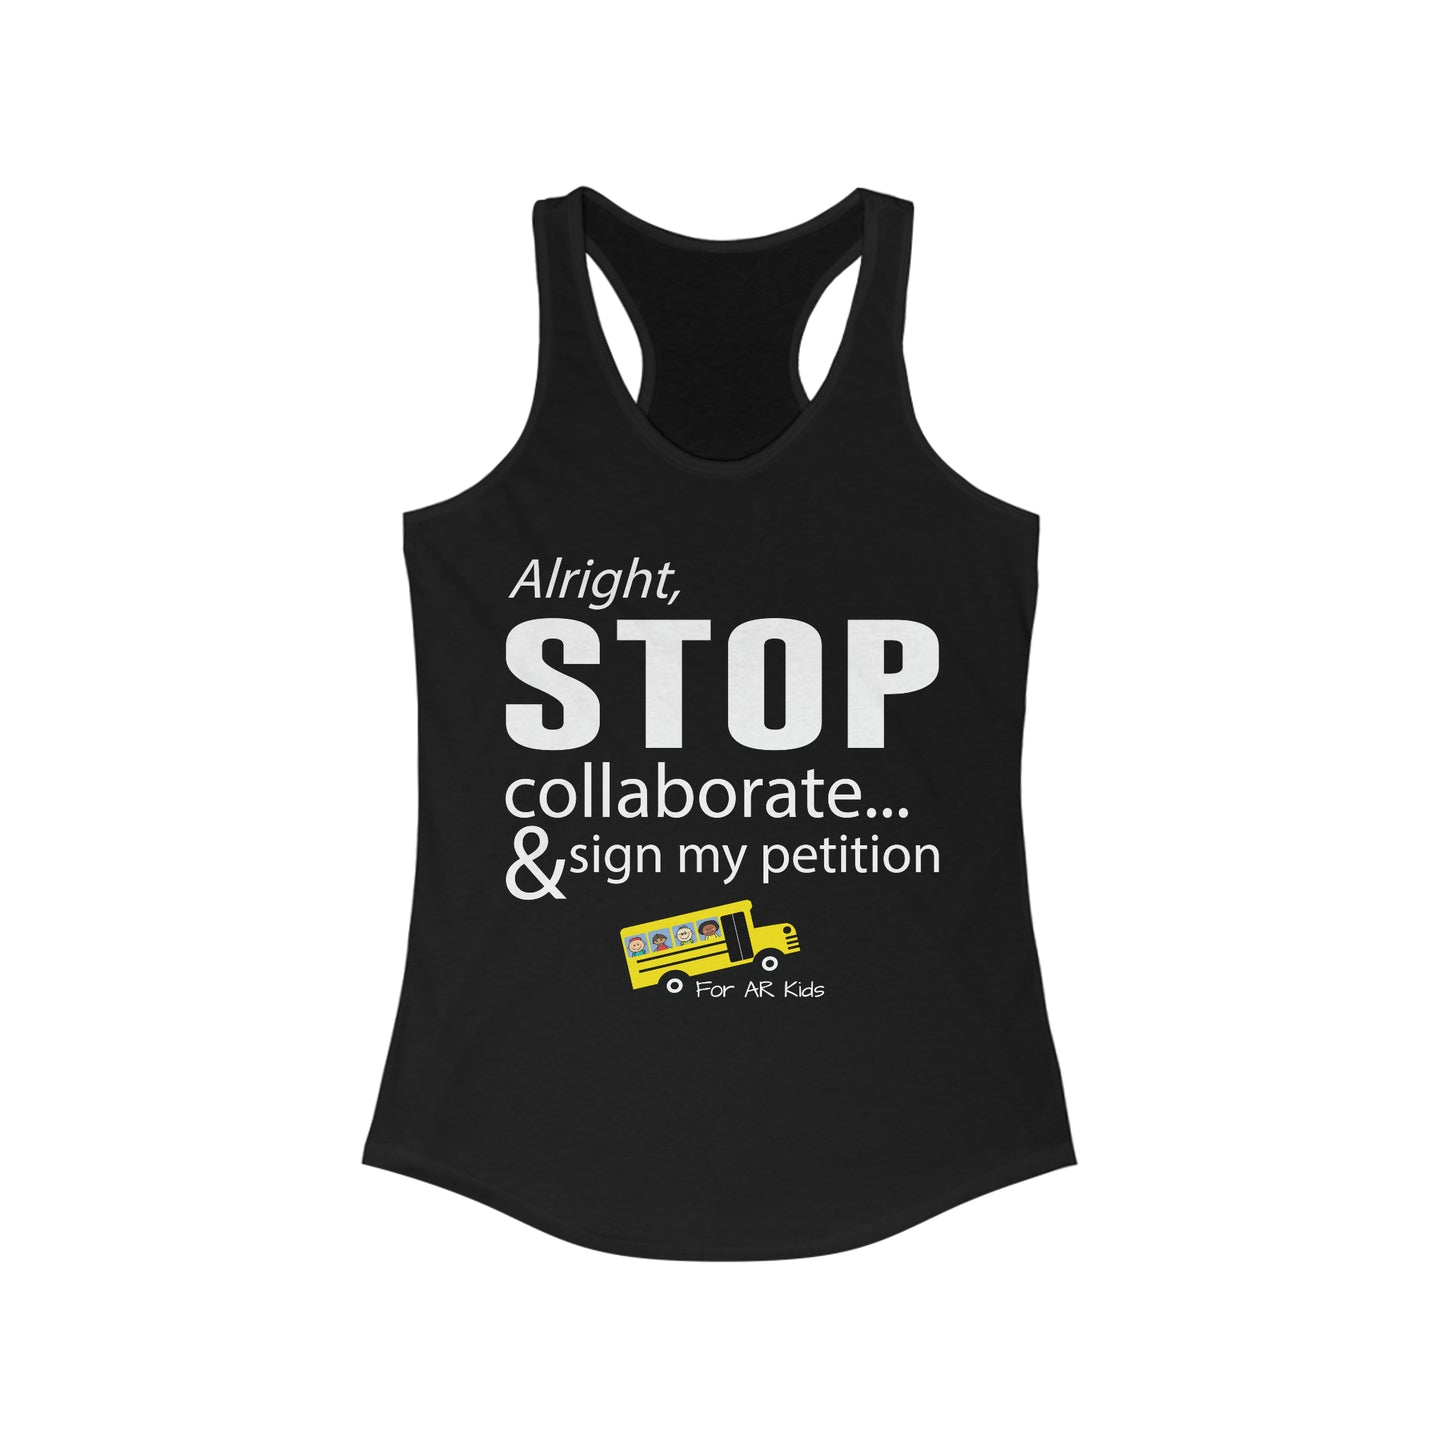 Alright Stop Collaborate and Sign My Petition Tank, AR Kids Tank, School Bus Tank, Educator Tank